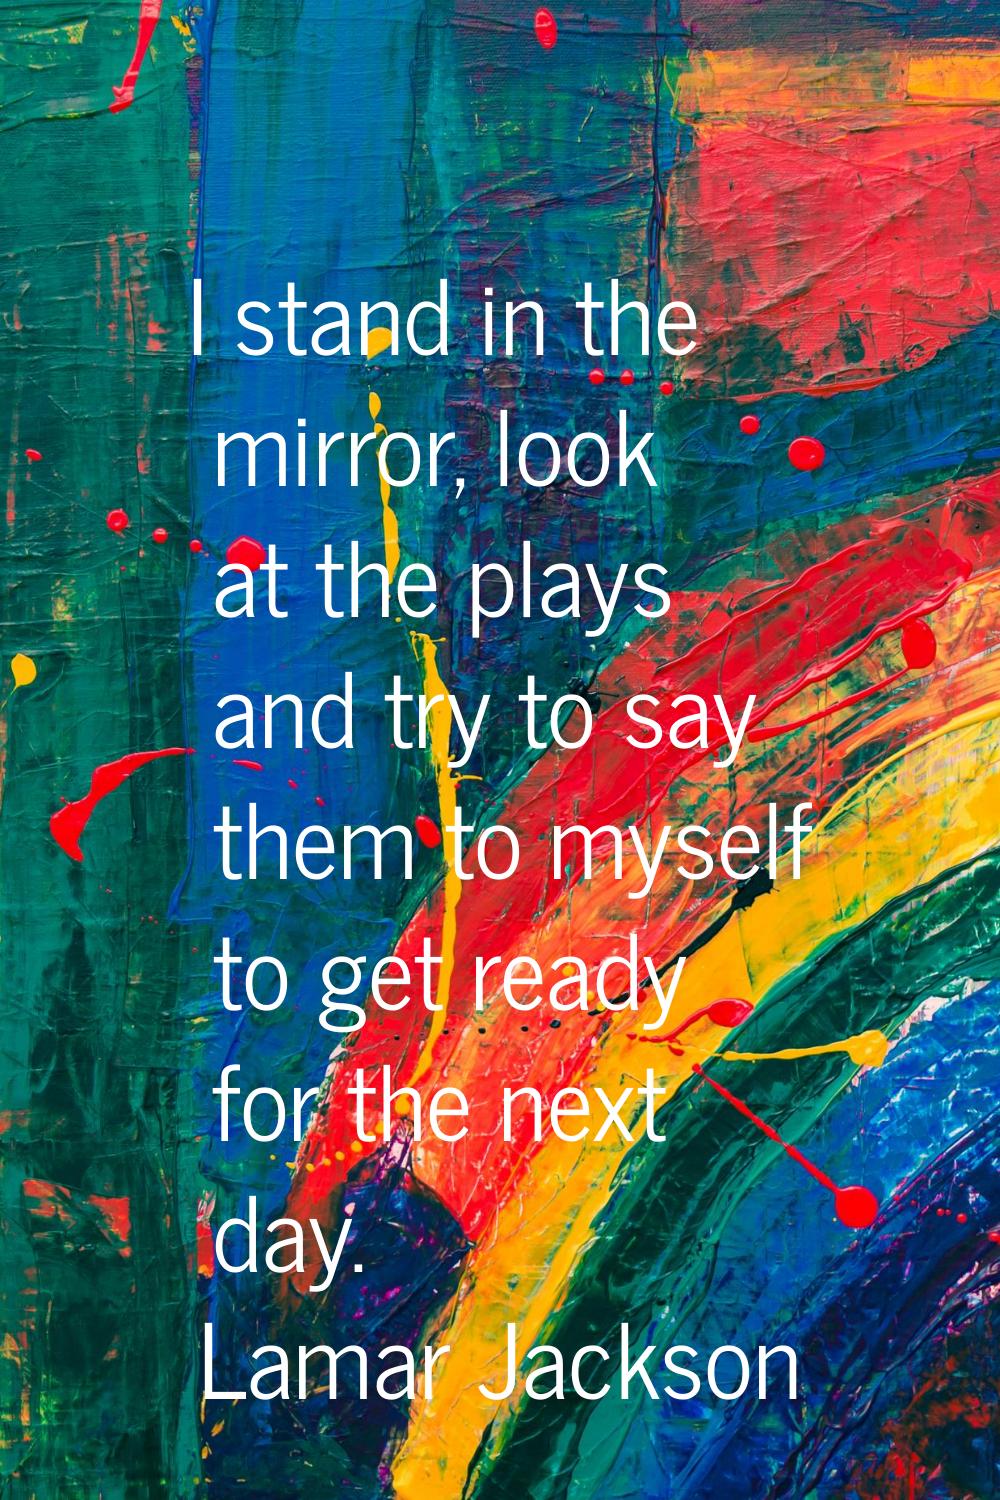 I stand in the mirror, look at the plays and try to say them to myself to get ready for the next da